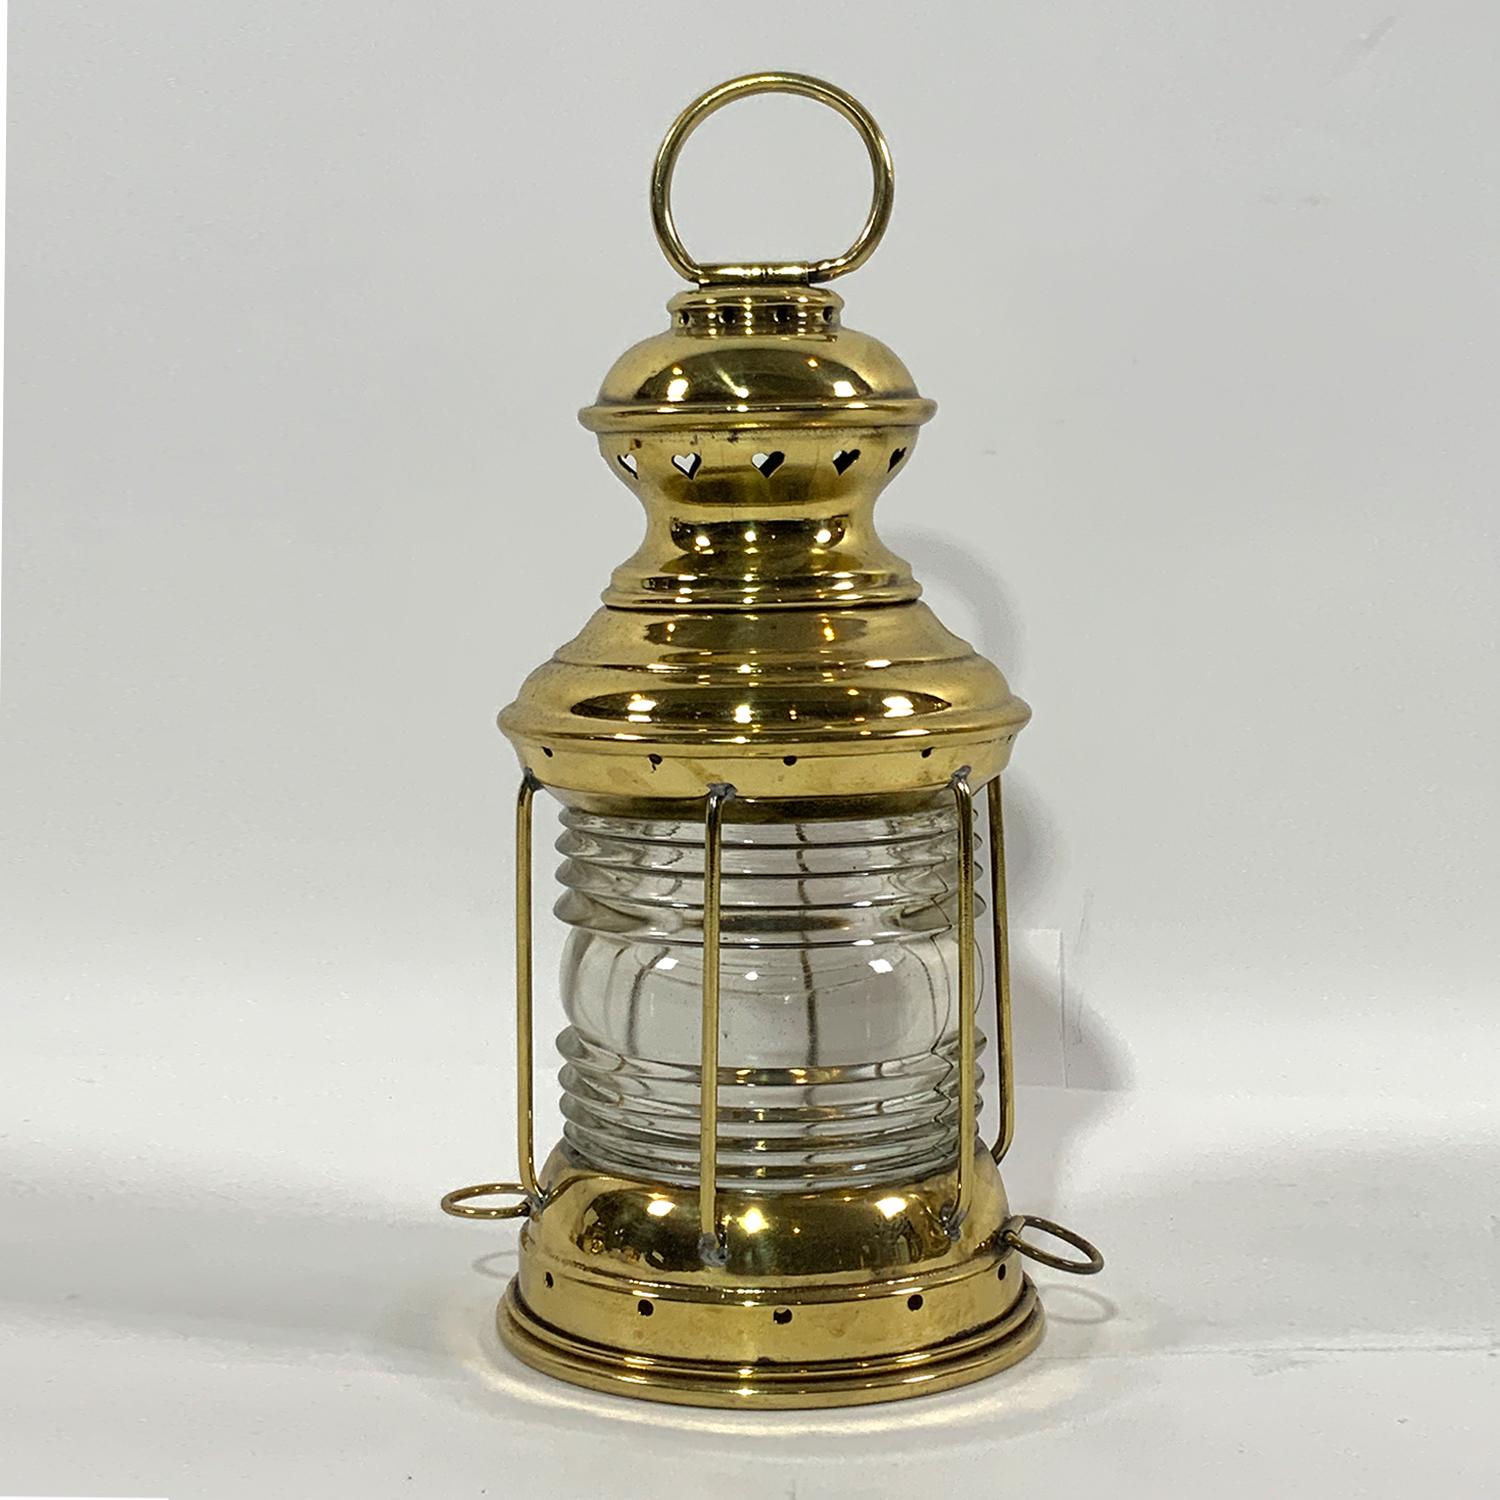 Brass boat lantern by Perko of Brooklyn, New York. Fresnel glass lens. With protective brass bars and hoisting ring. Meticulously polished and lacquered. Circa 1940. With original oil burner.